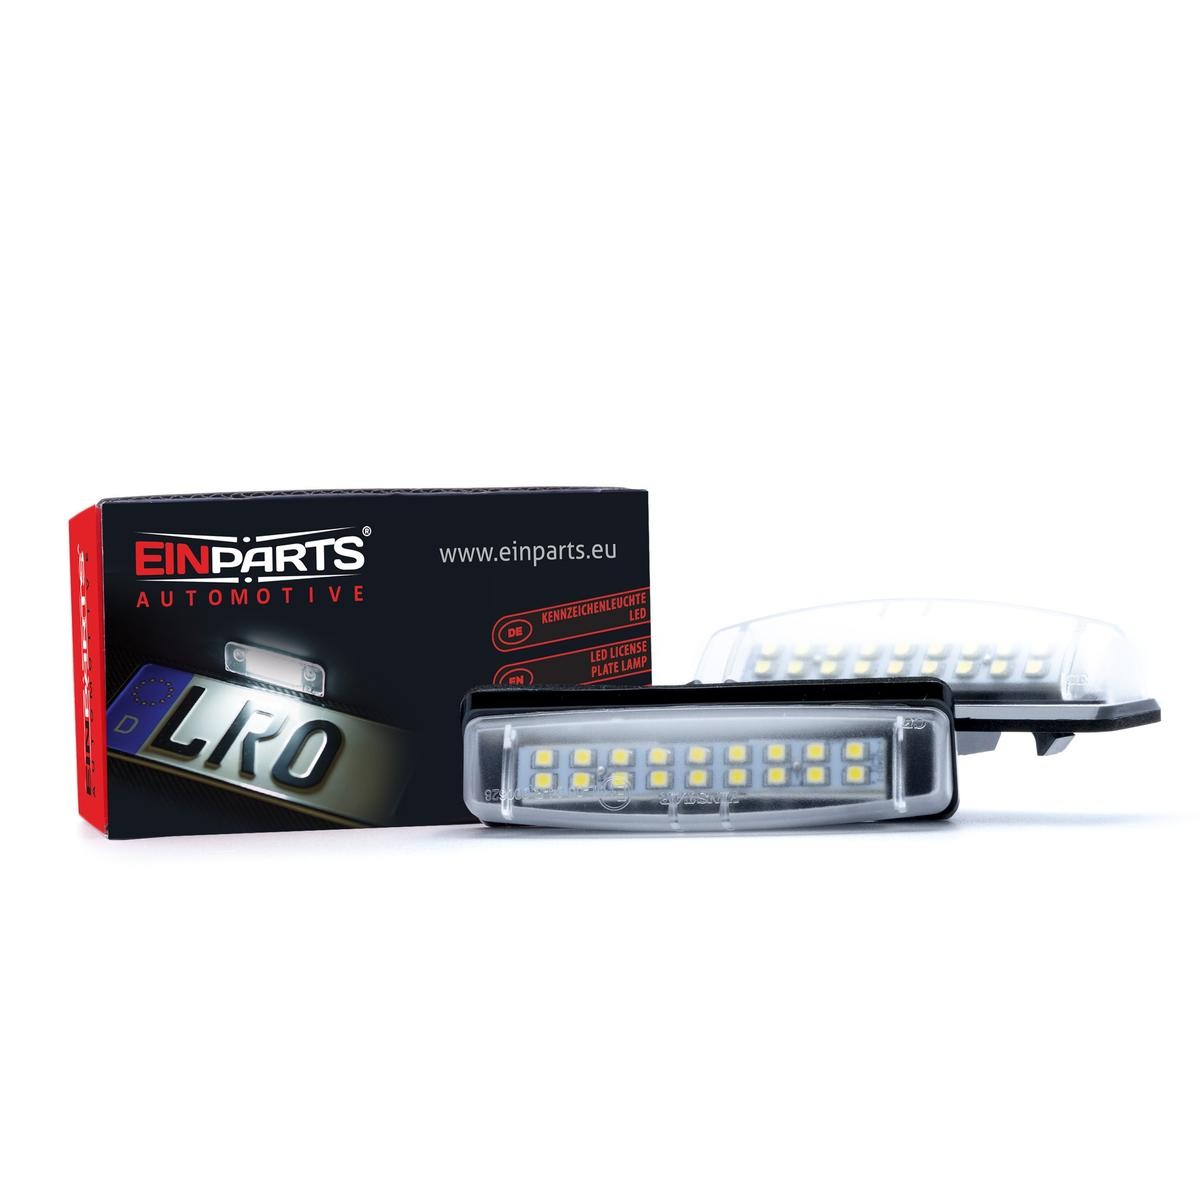 EINPARTS LED Suitable for CAN bus systems Licence Plate Light EP15 buy